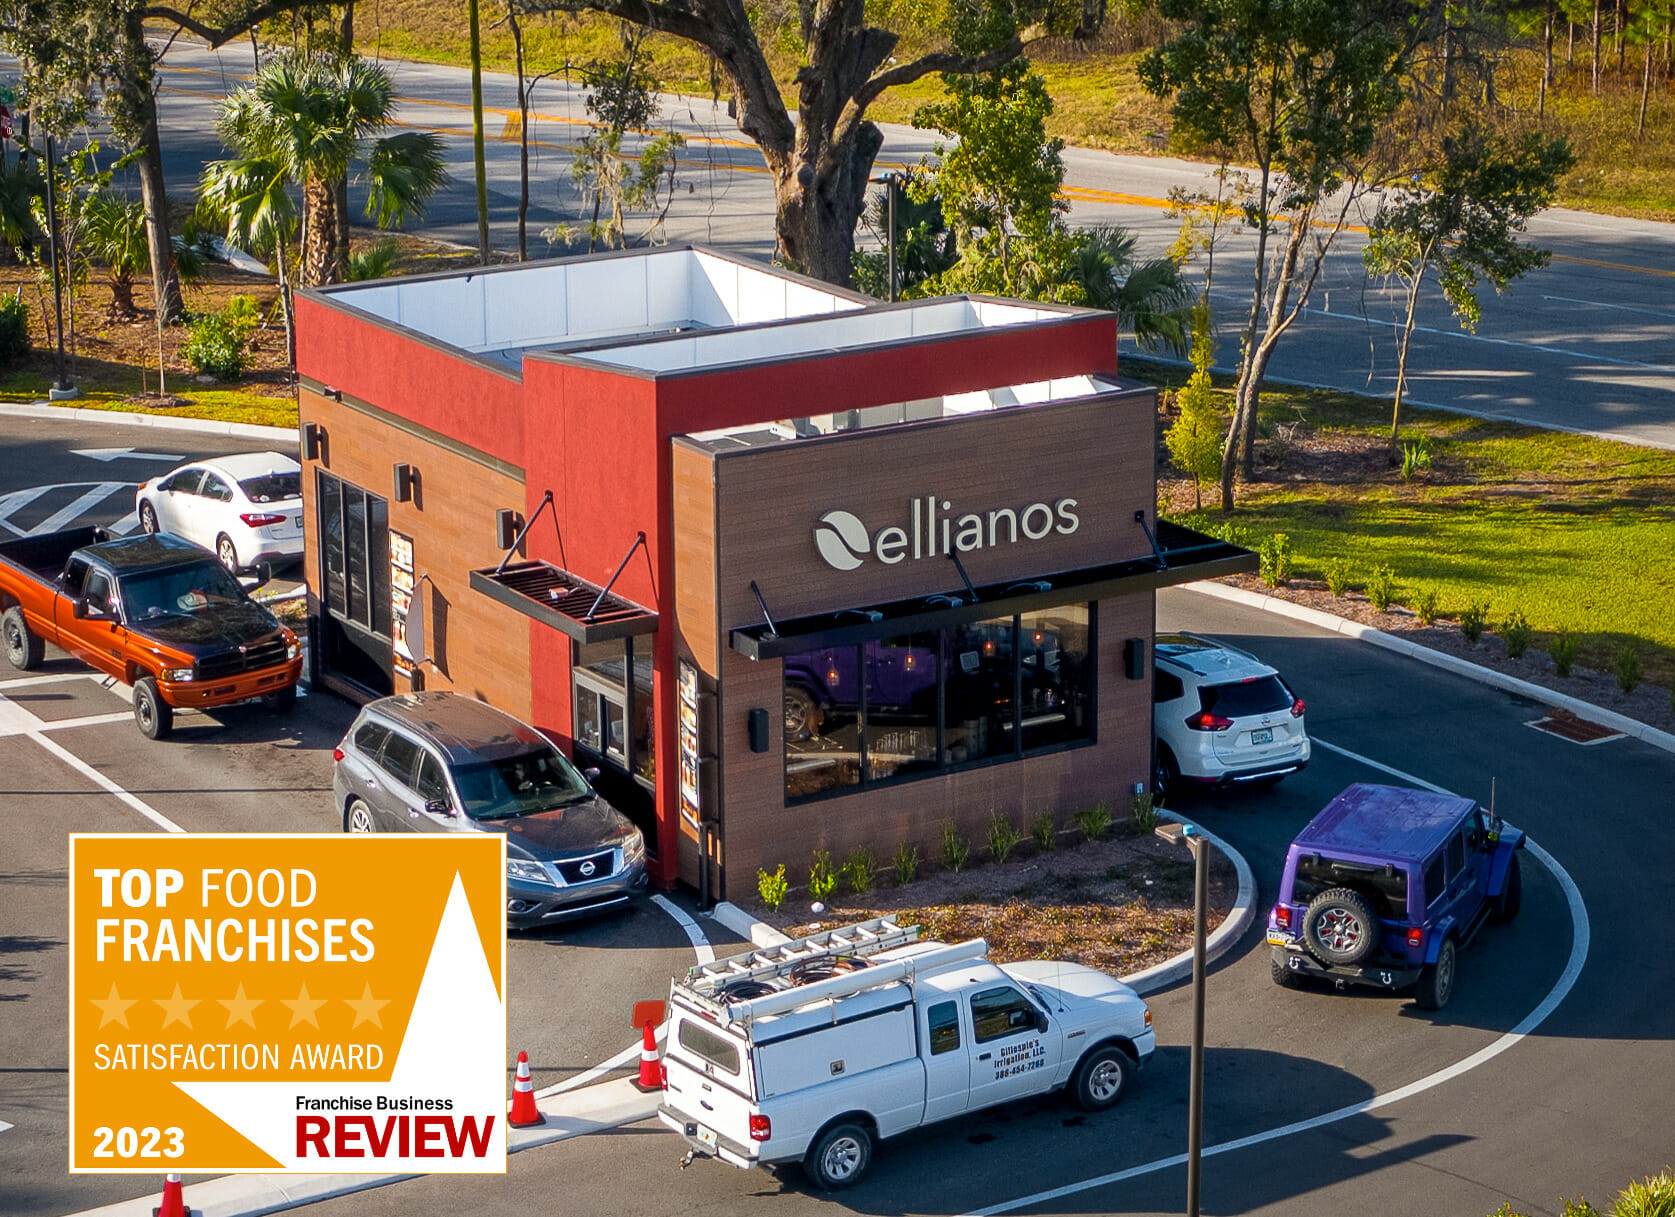 Ellianos Coffee Named a Top Food Franchise by Franchise Business Review for a Third Straight Year